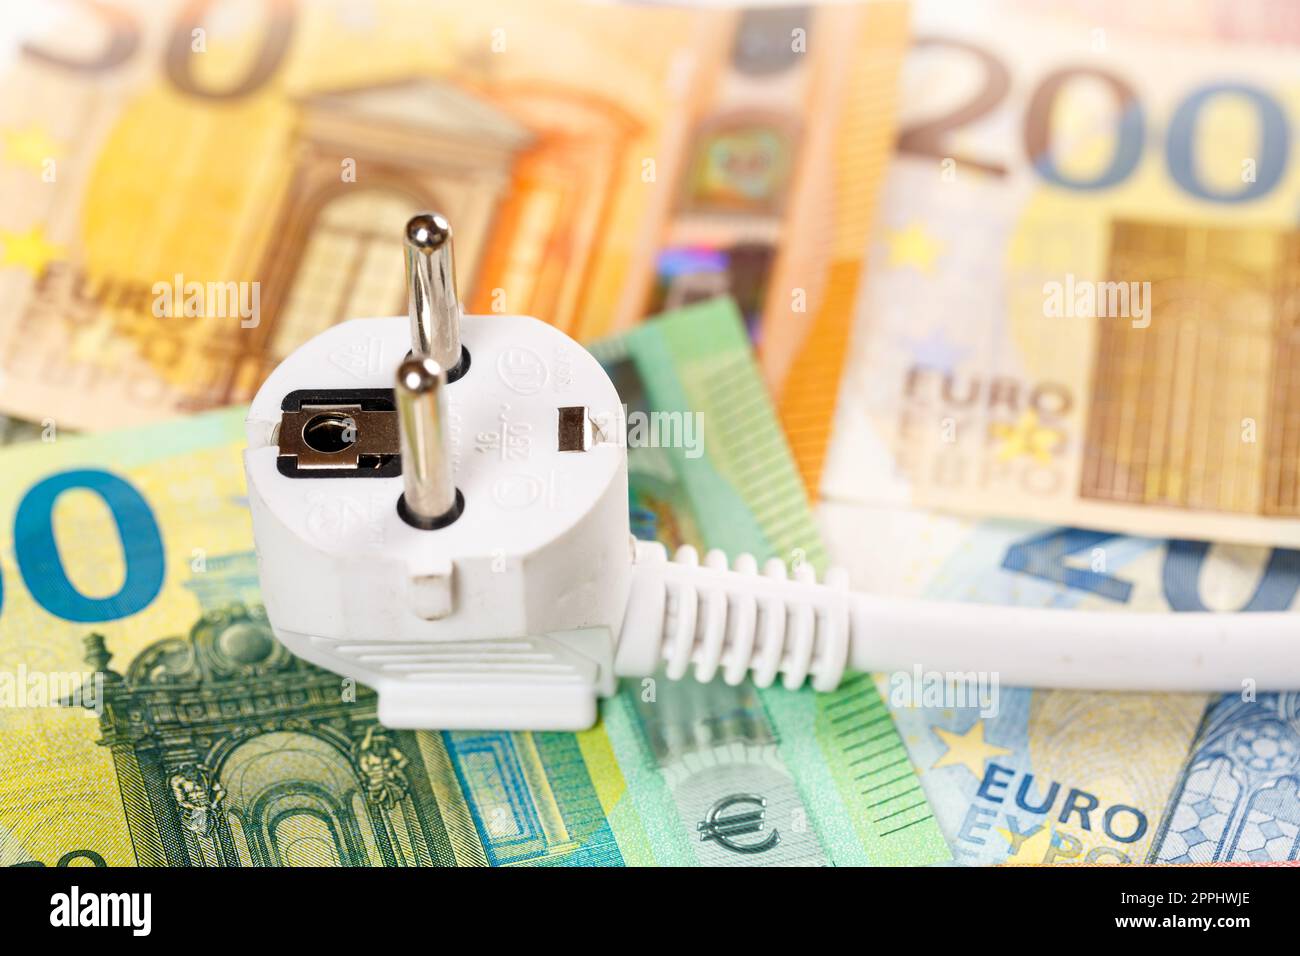 Cost of energy price of electricity symbolic photo with power cord mains cable Stock Photo